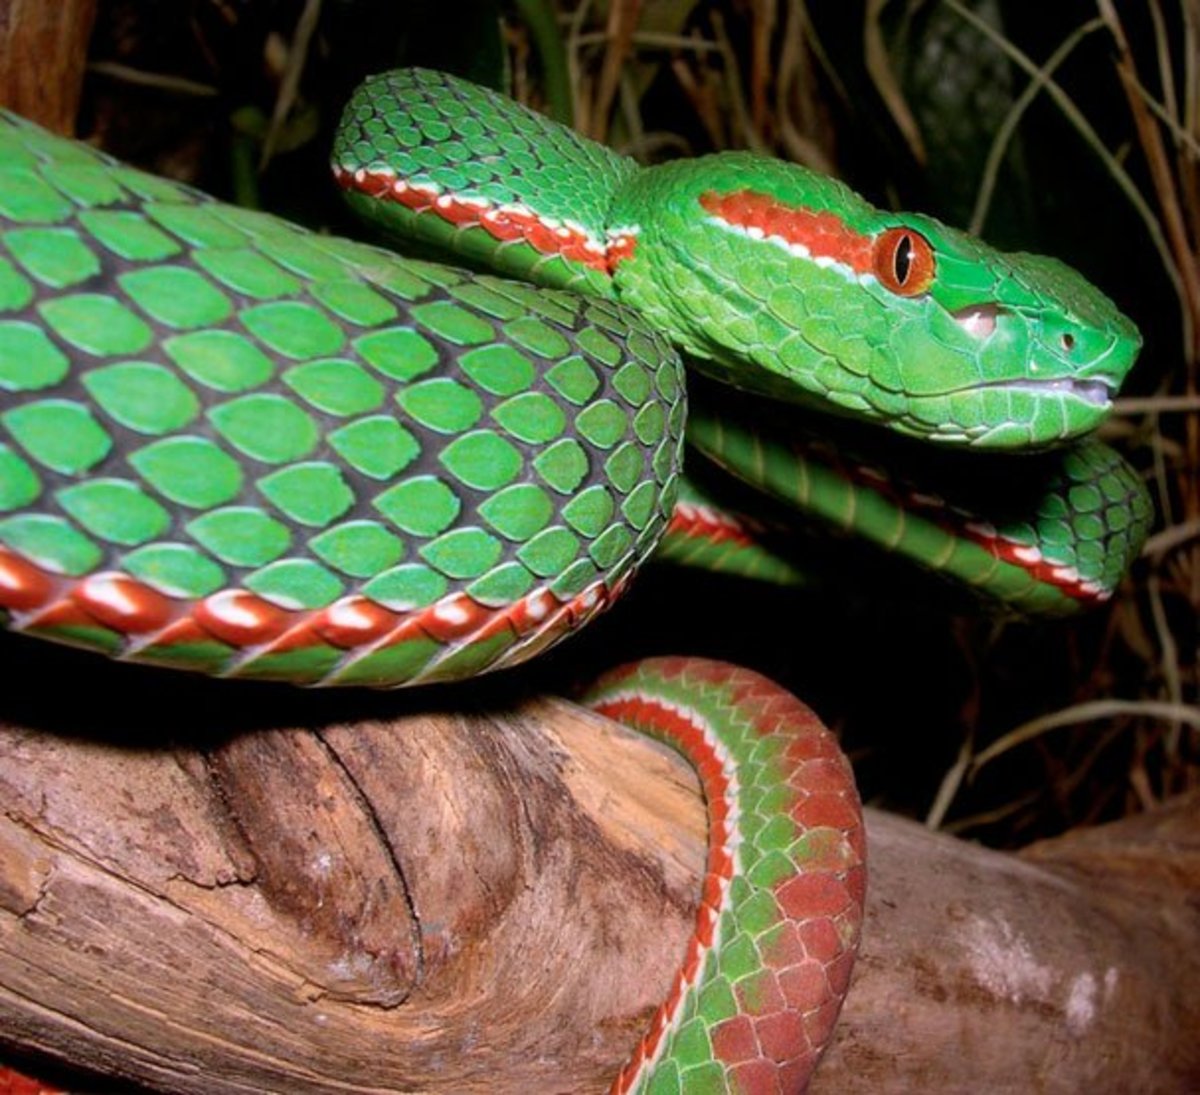 13 Most Beautiful Snakes in the World - Owlcation